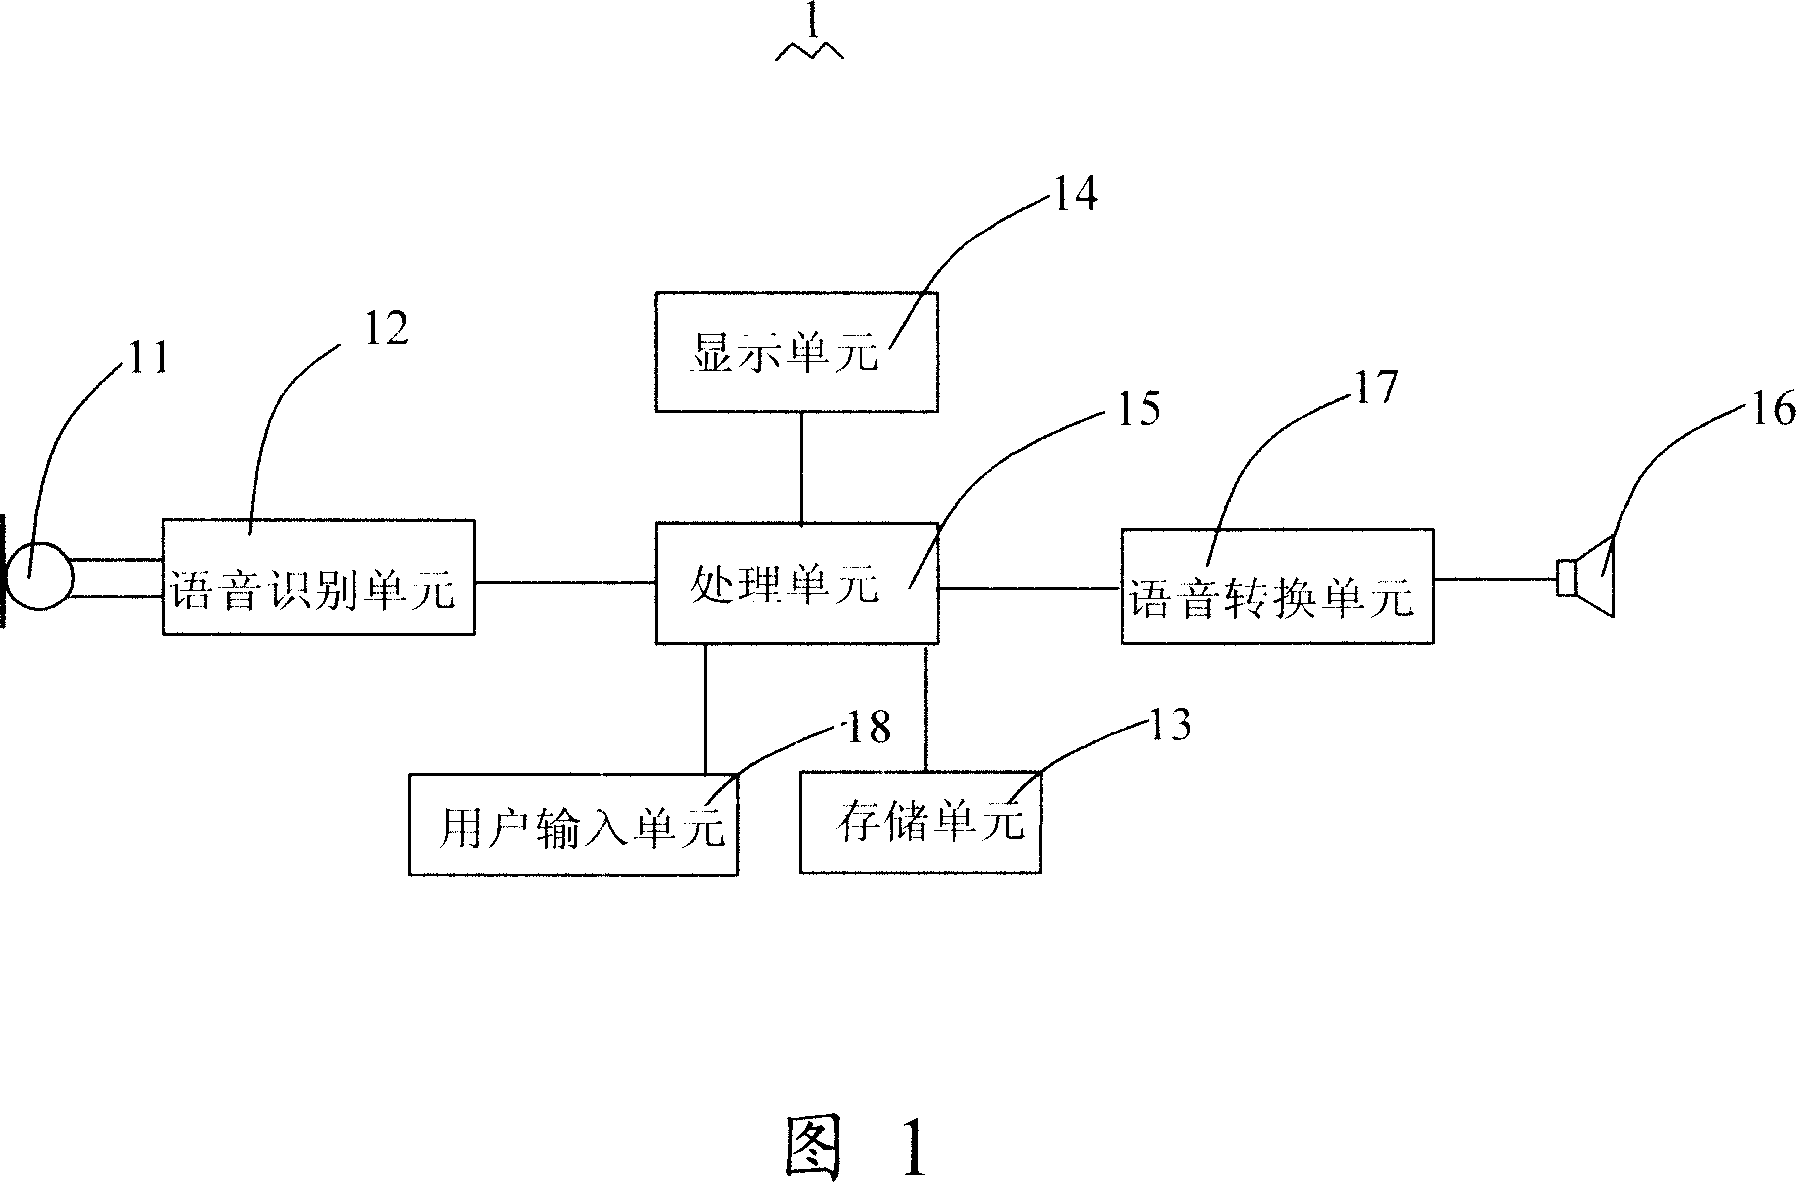 Mobile terminal with speech recognition and translating function